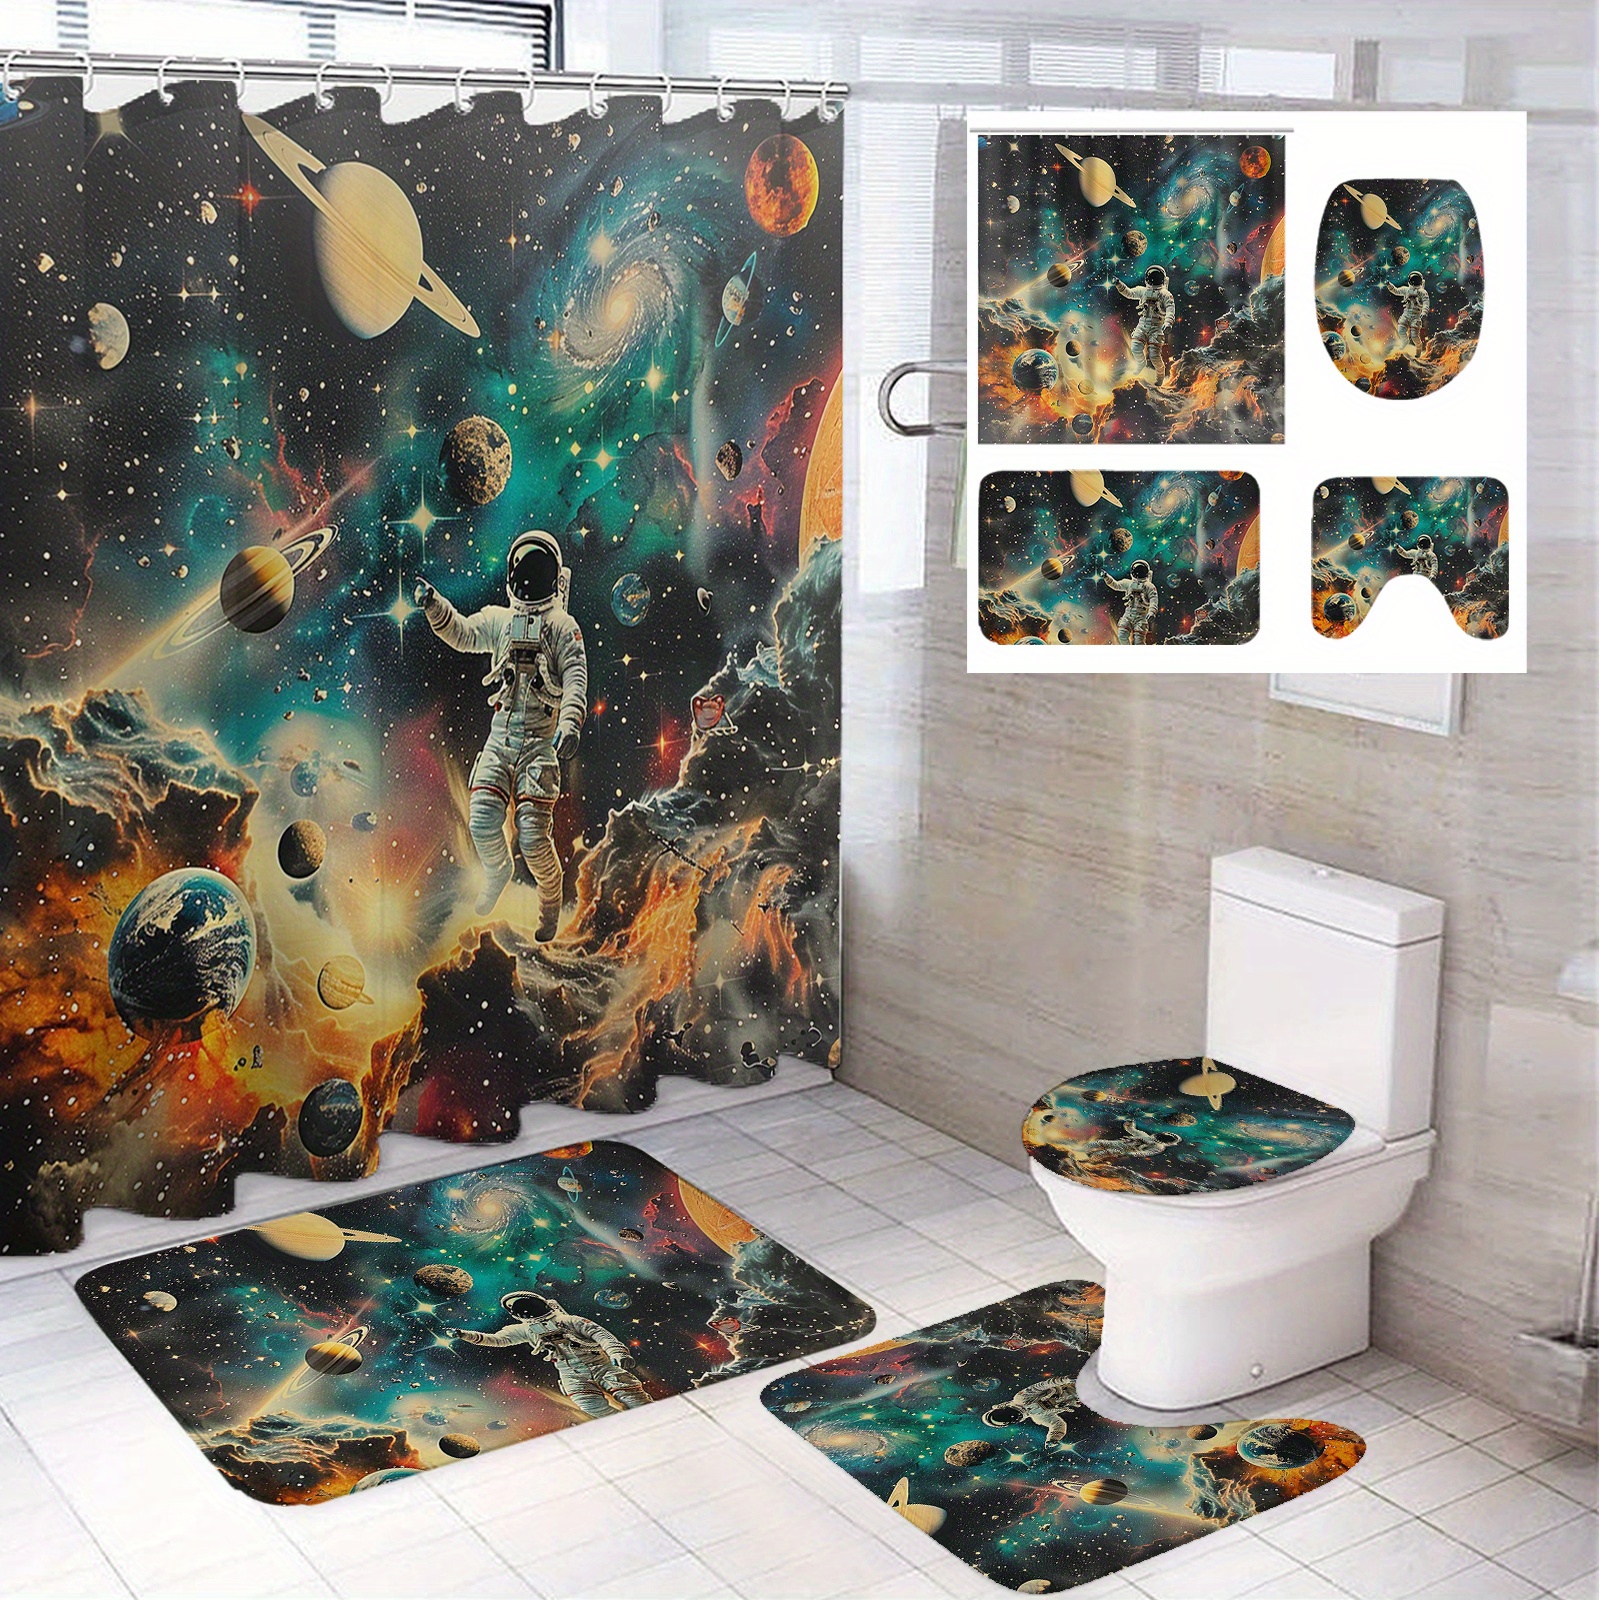 

1/4pcs Astronaut And Mysterious Space Pattern Modern Bathroom Decor, Polyester Bathroom Set With 12 Hooks, Bathroom Non-slip Mat, Toilet Seat Cover And U-shaped Mat Home Decor 71*71in